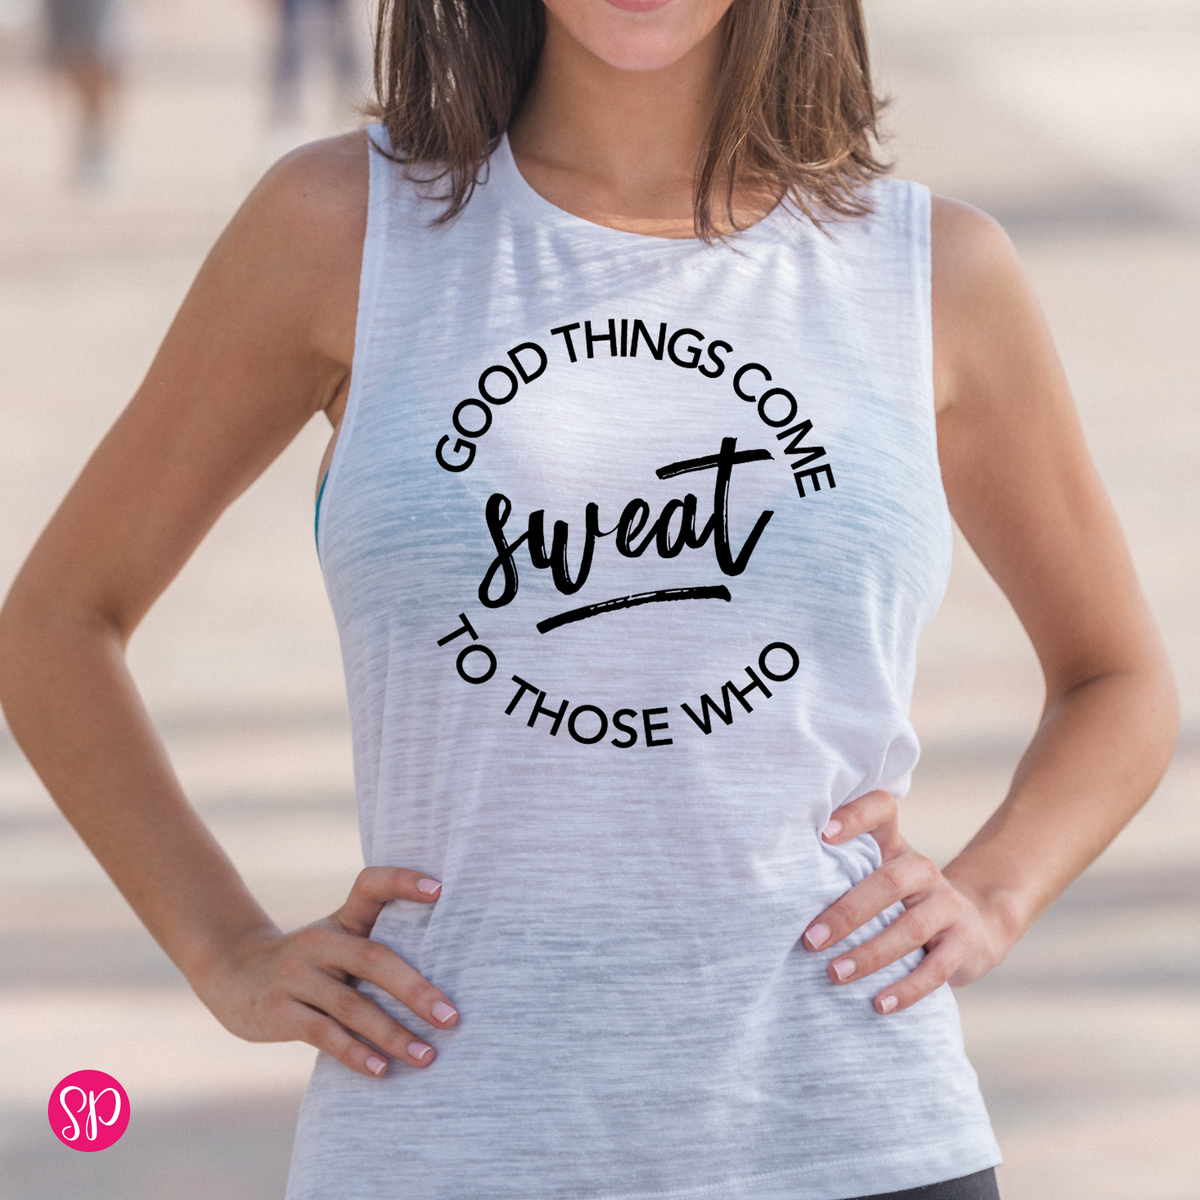 Good Things Come To Those Who Sweat Fitness Workout Muscle Tank Top Women